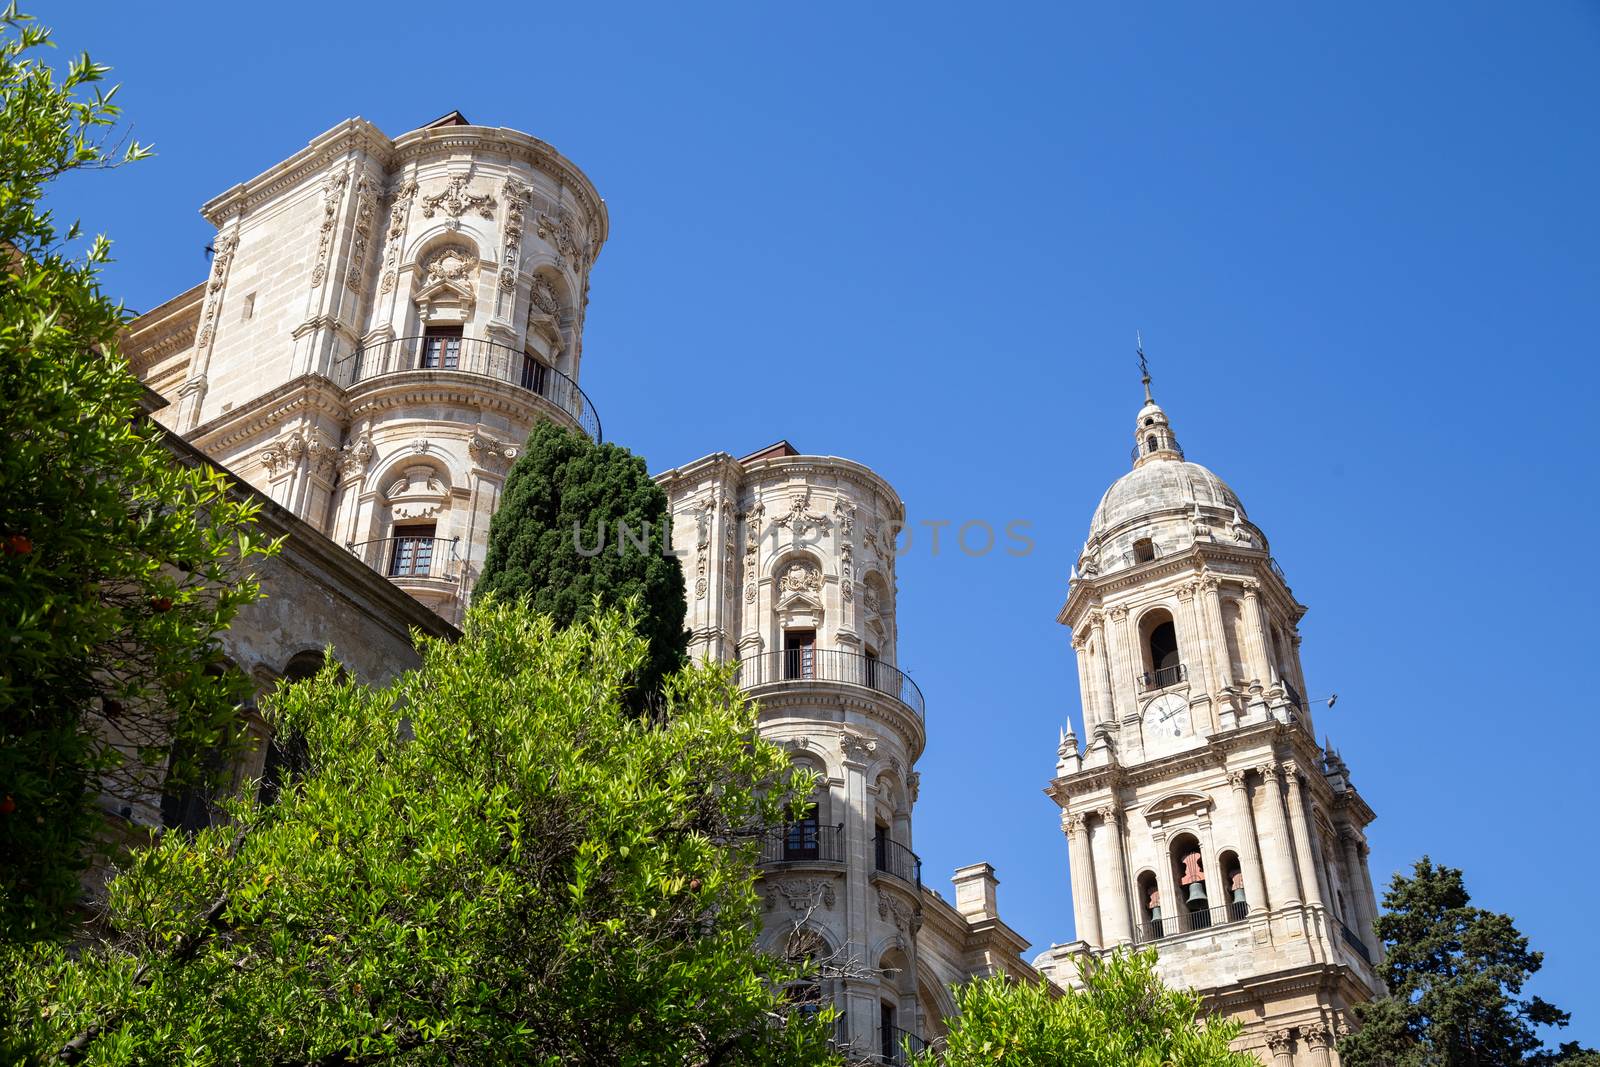 Malaga, Spain - May 25, 2019:  Exterior view of the cathedral in the historic city centre.